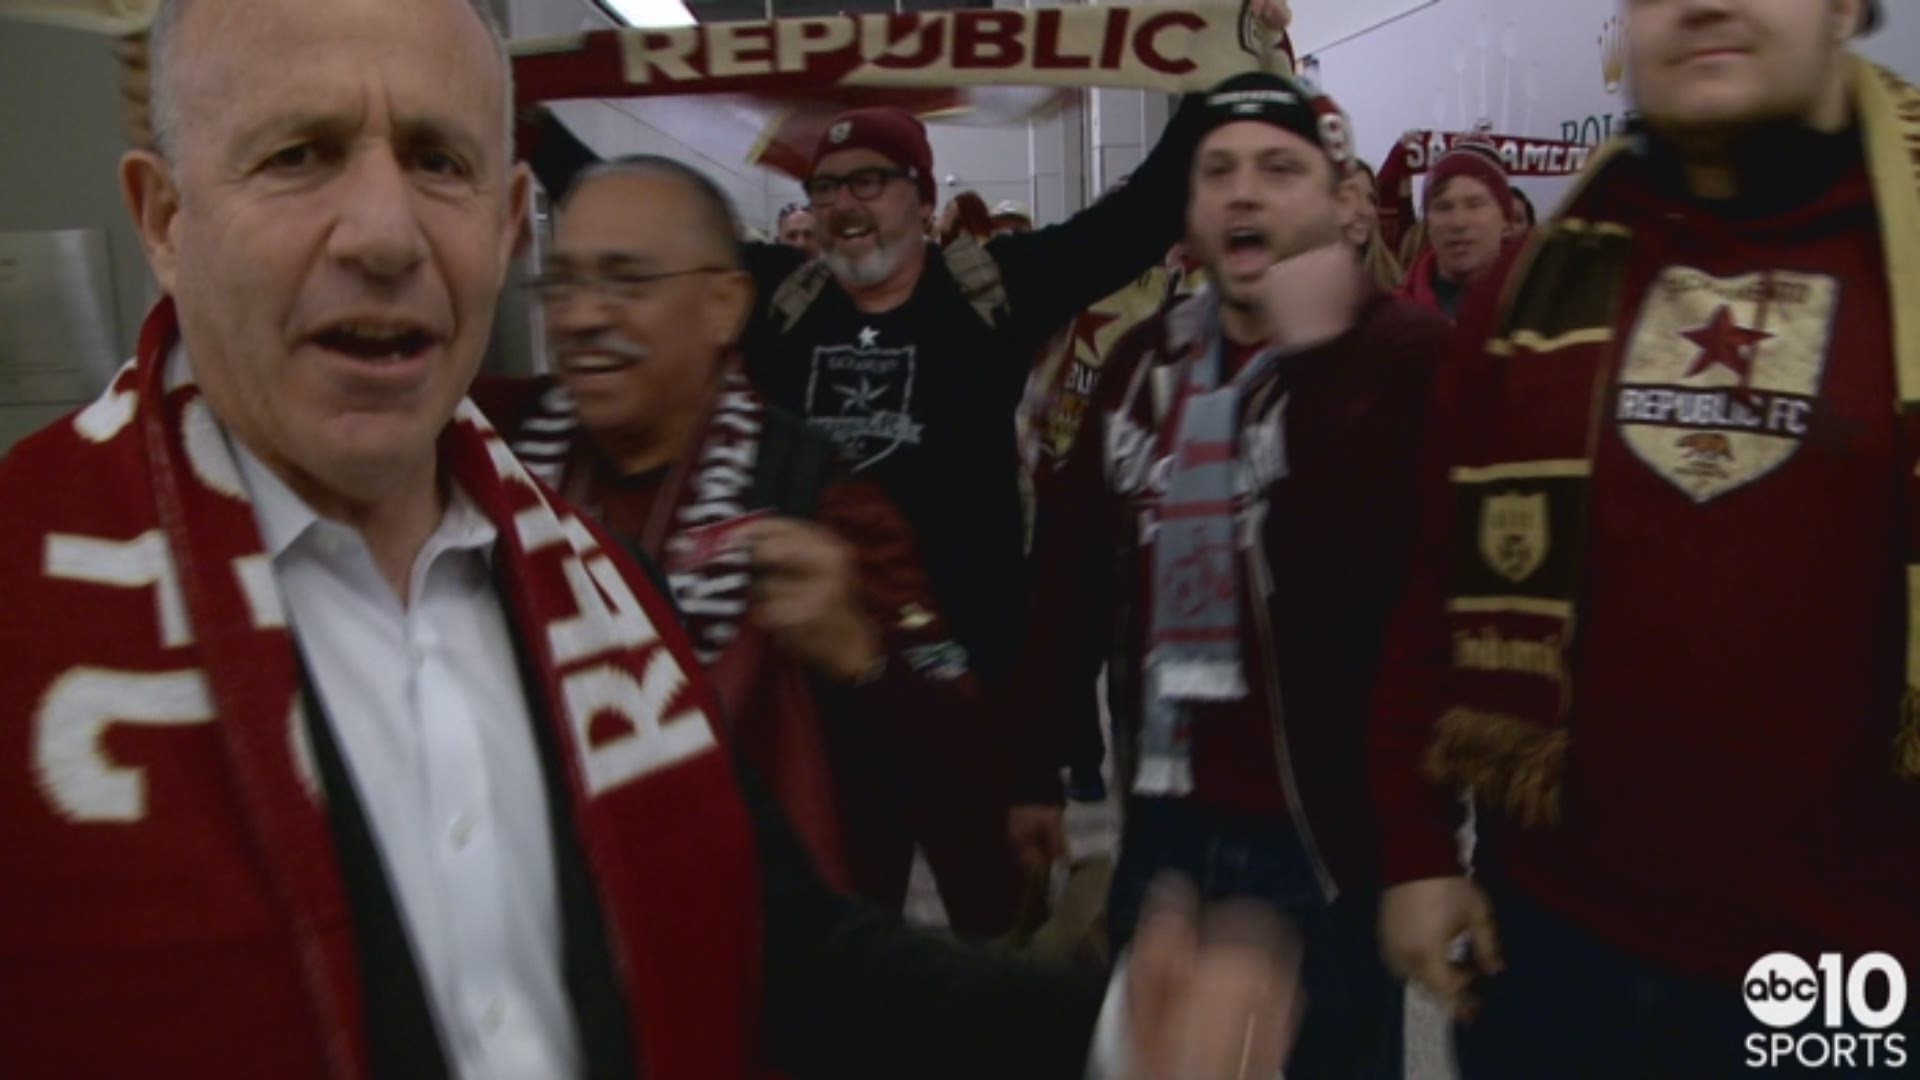 Sacramento Mayor Darrell Steinberg returned from New York City on Wednesday night and spoke to ABC10 about the presentation made with the Republic FC to the MLS, and the impact from the many fans of the club who traveled with him.